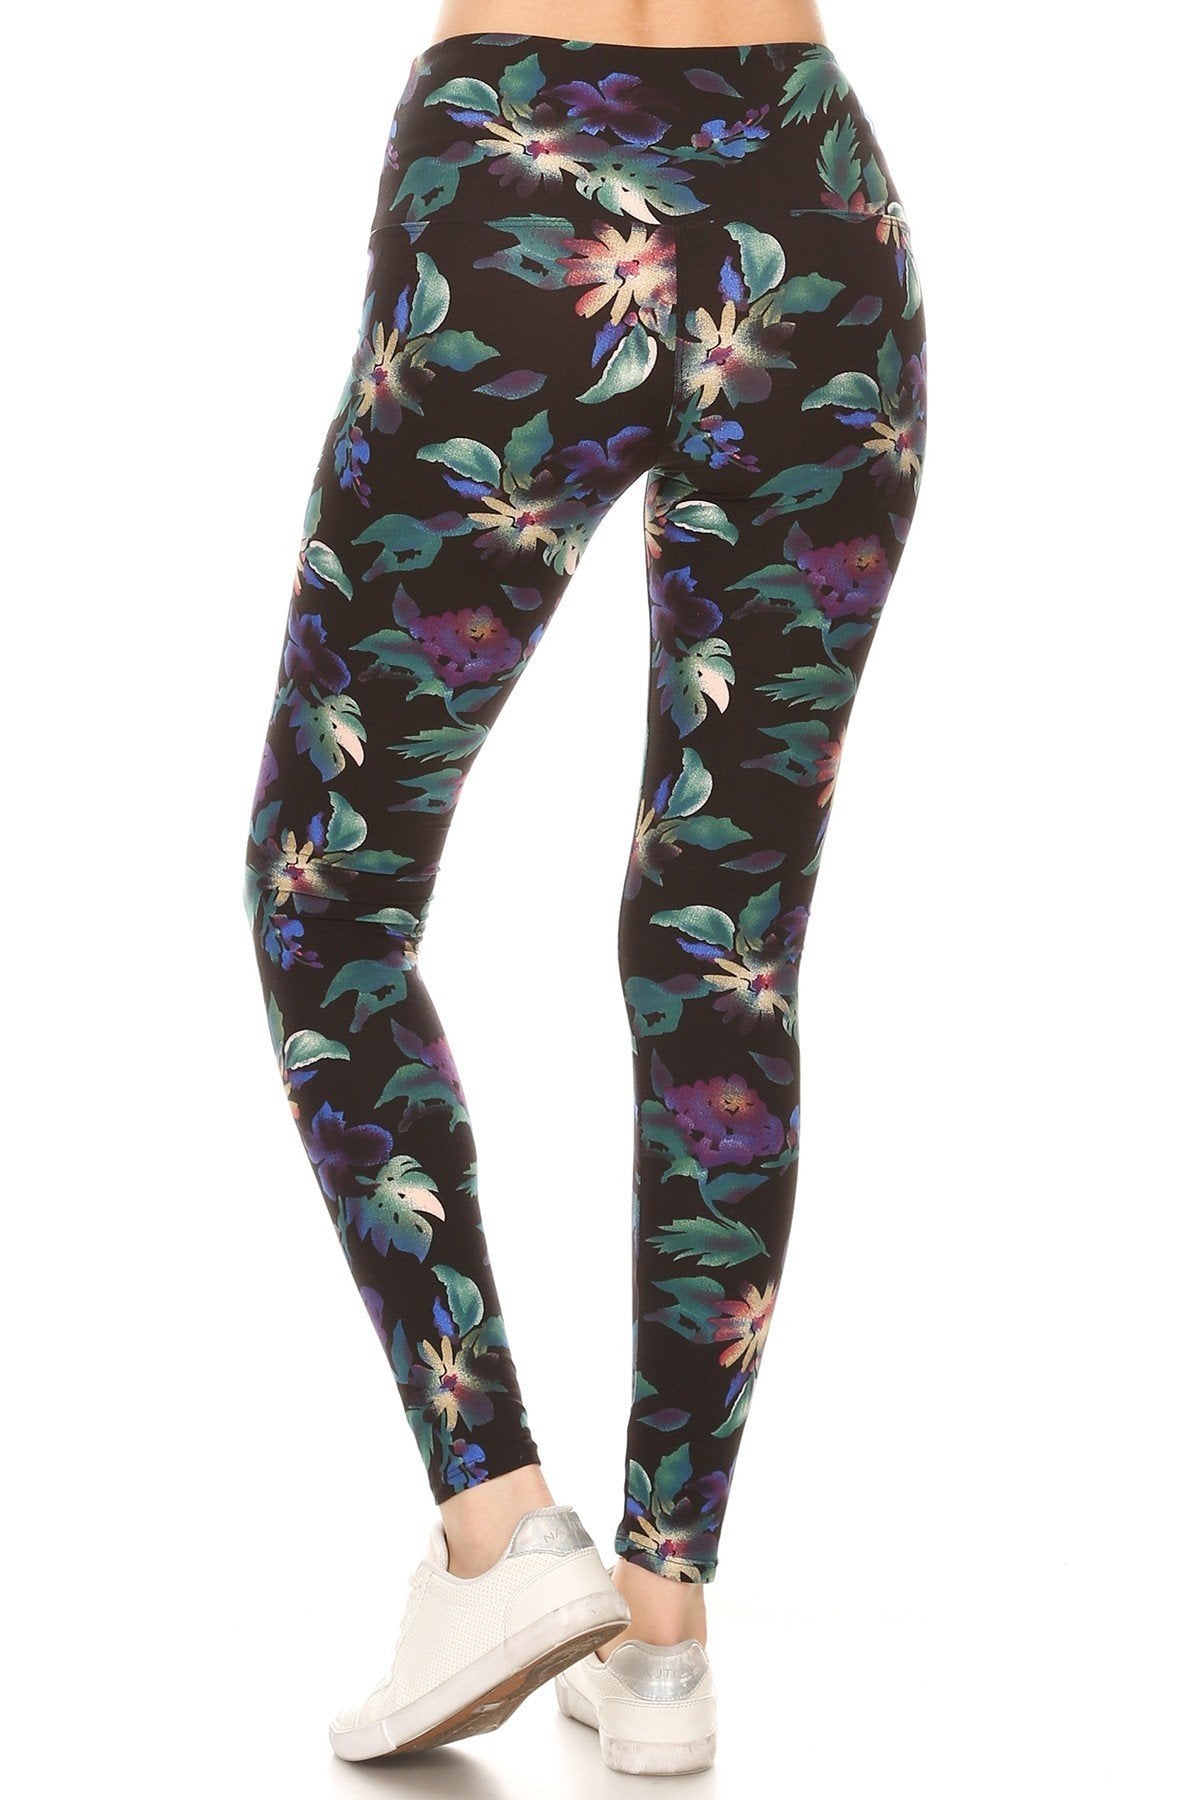 Yoga Style Floral Printed Knit Legging